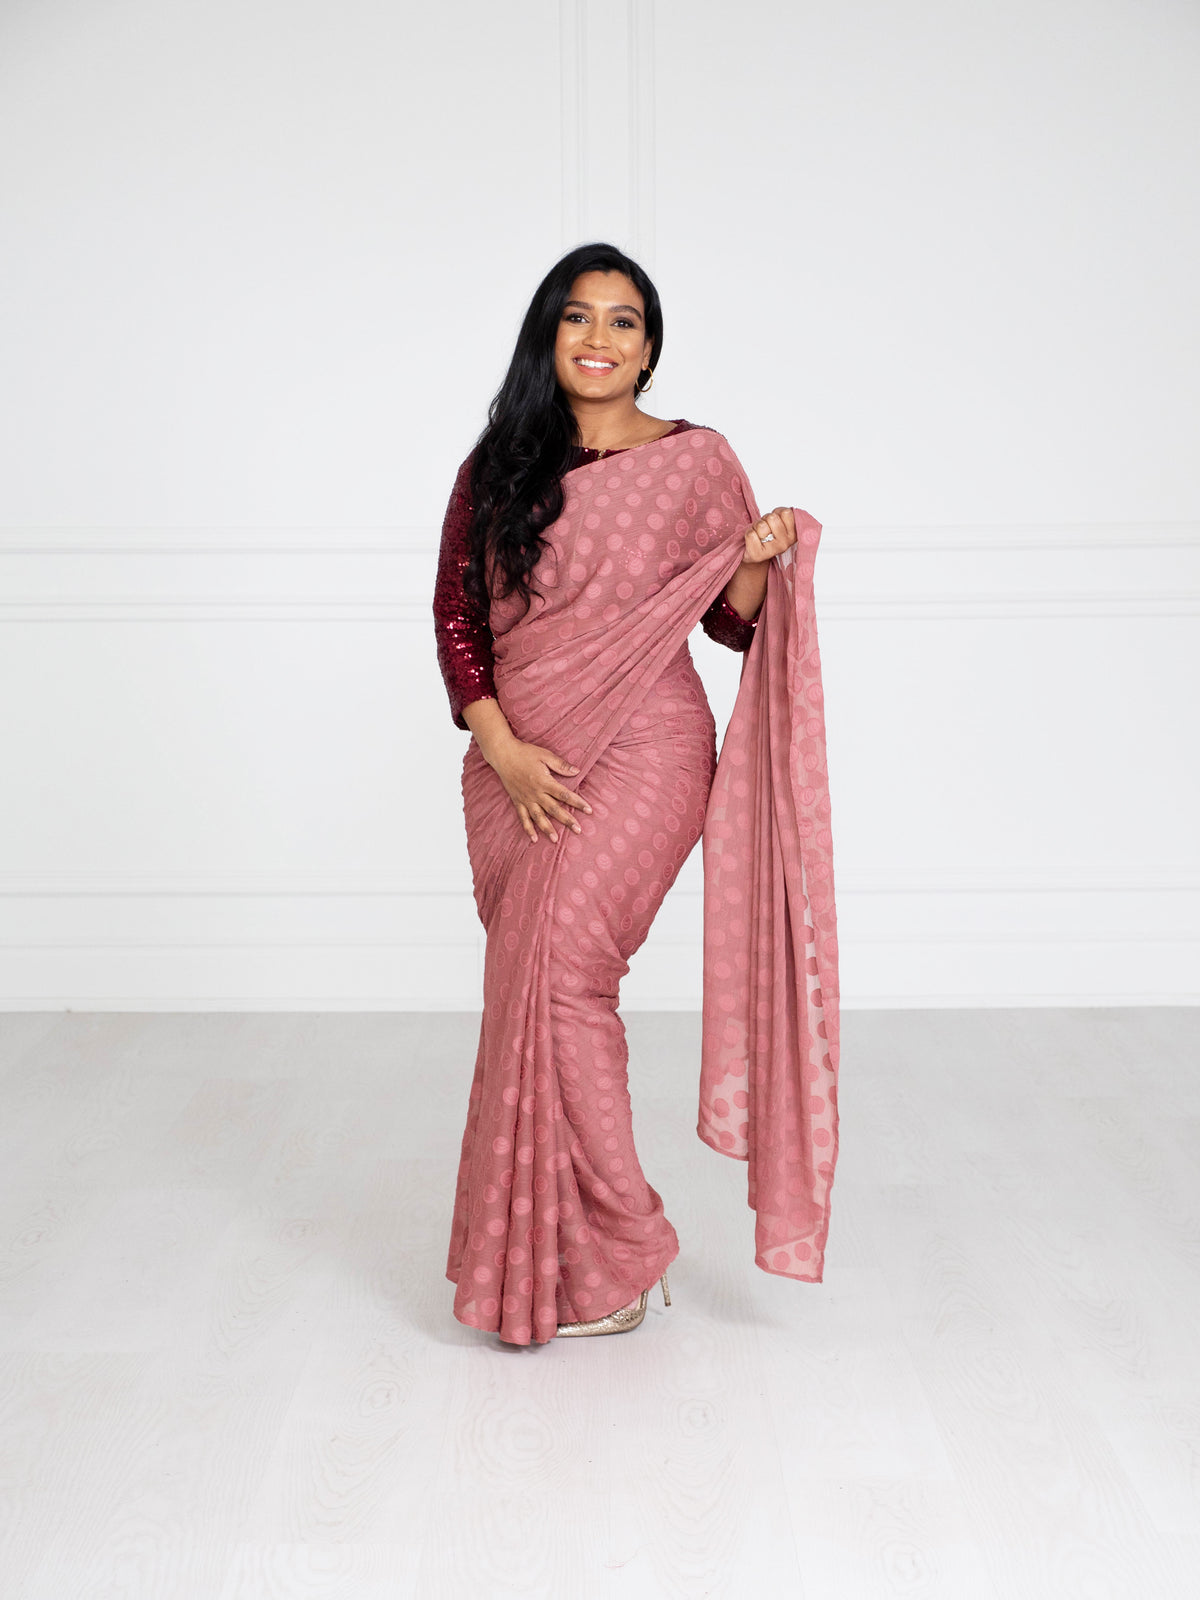 Tia Bhuva new Lilac colored lace saree- never worn. Does not include blouse.